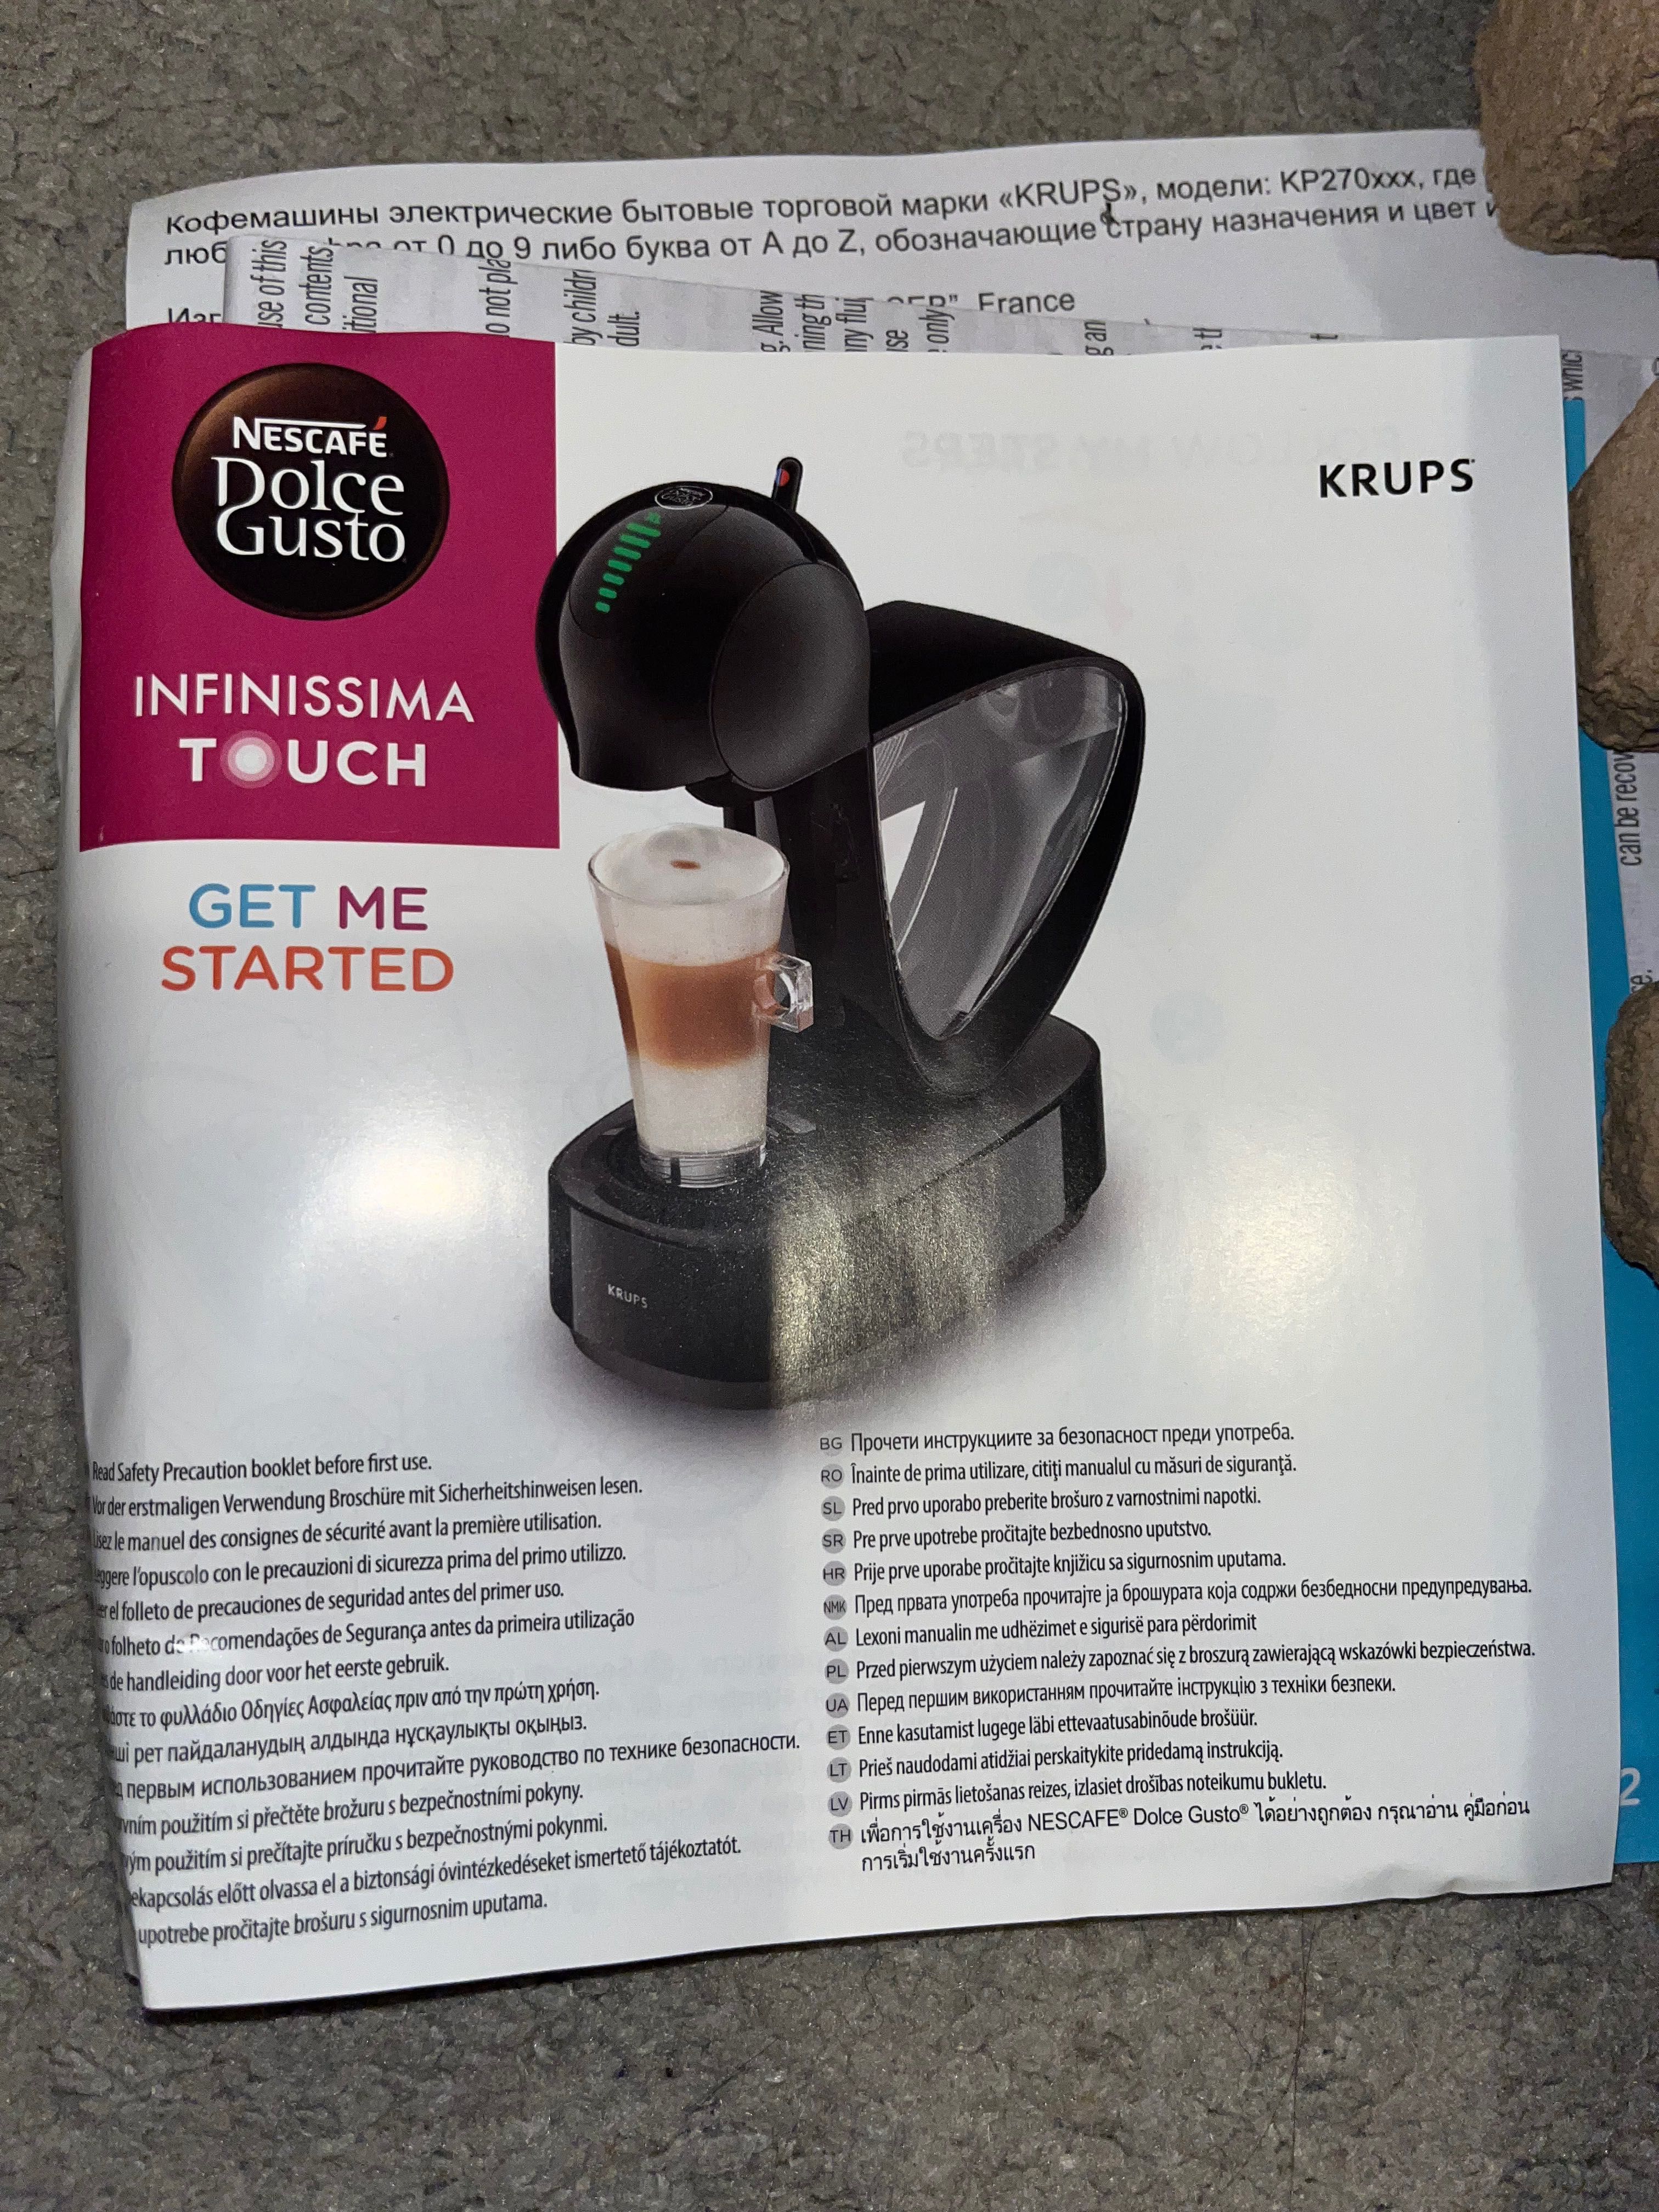 Dolce gusto KRUPS кафемашина